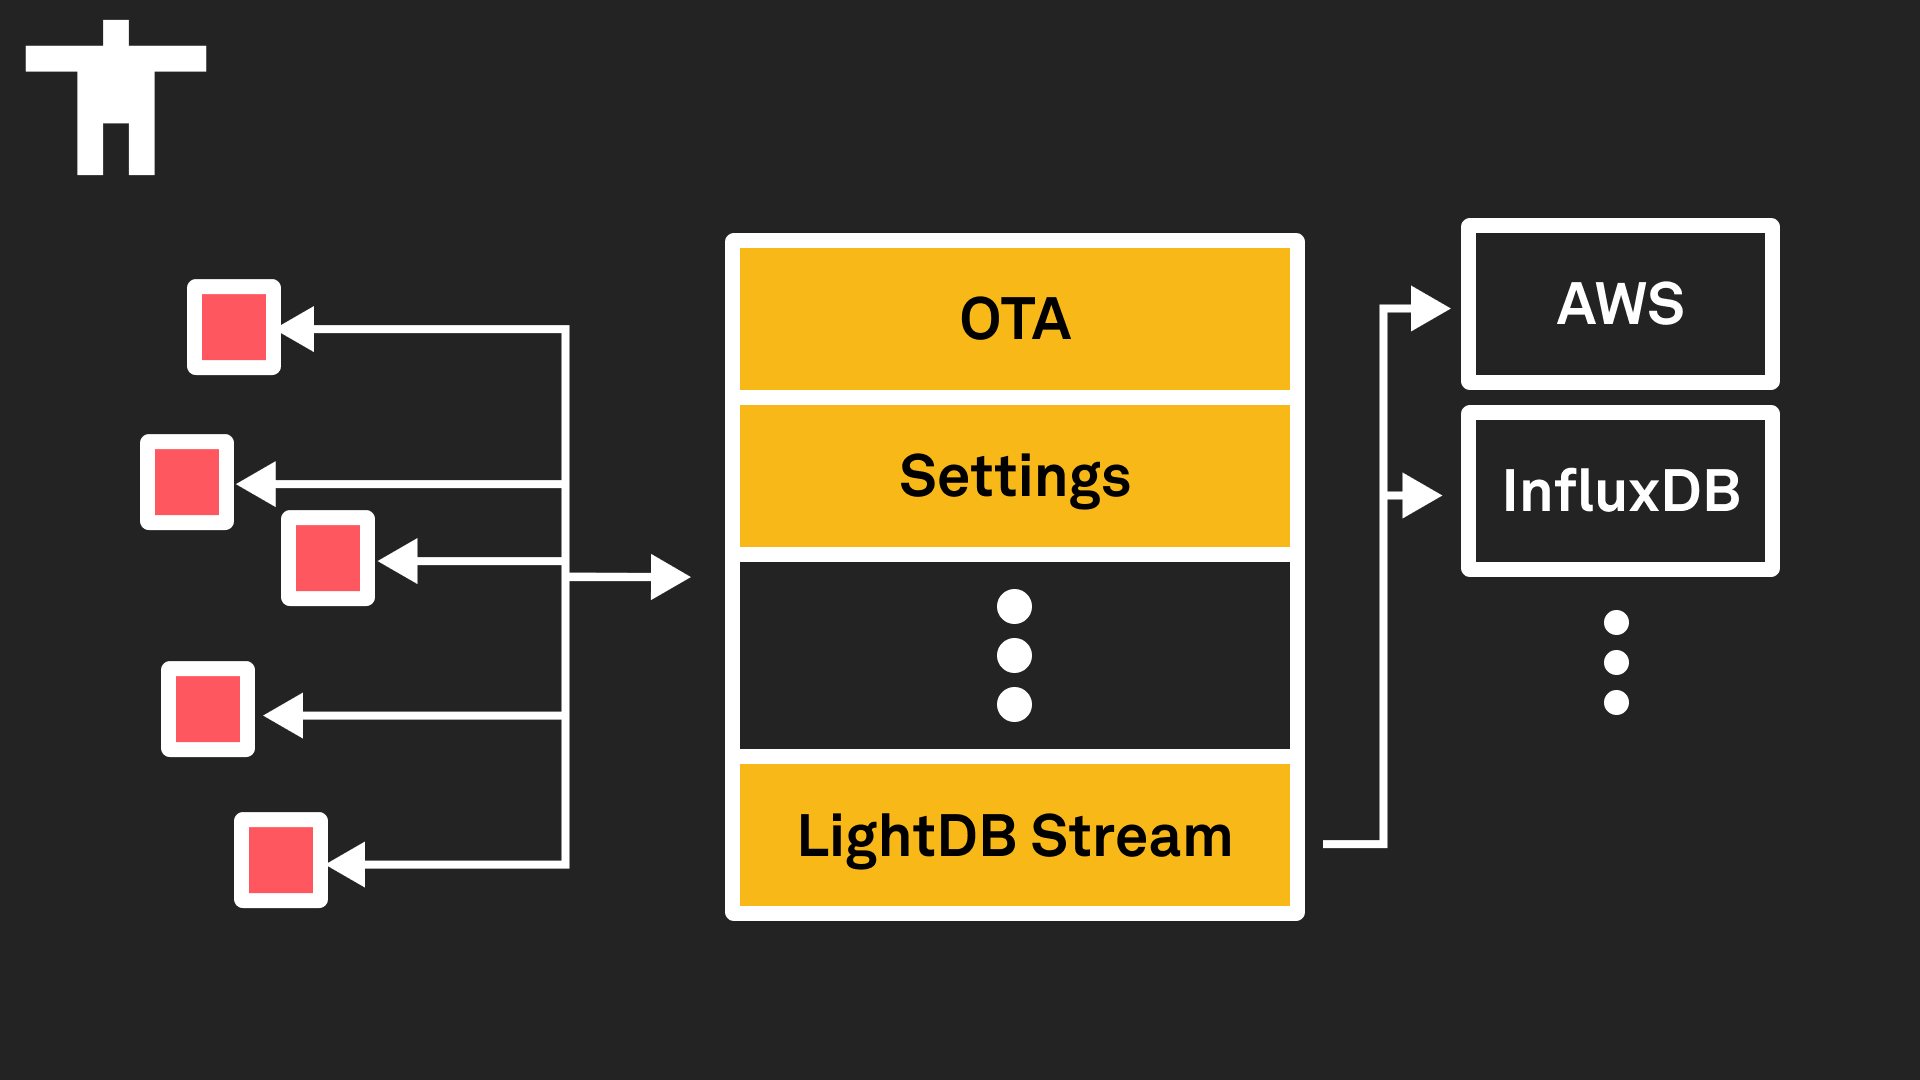 Diagram showing devices talking to Golioth services, and LightDB Stream talking to external services.